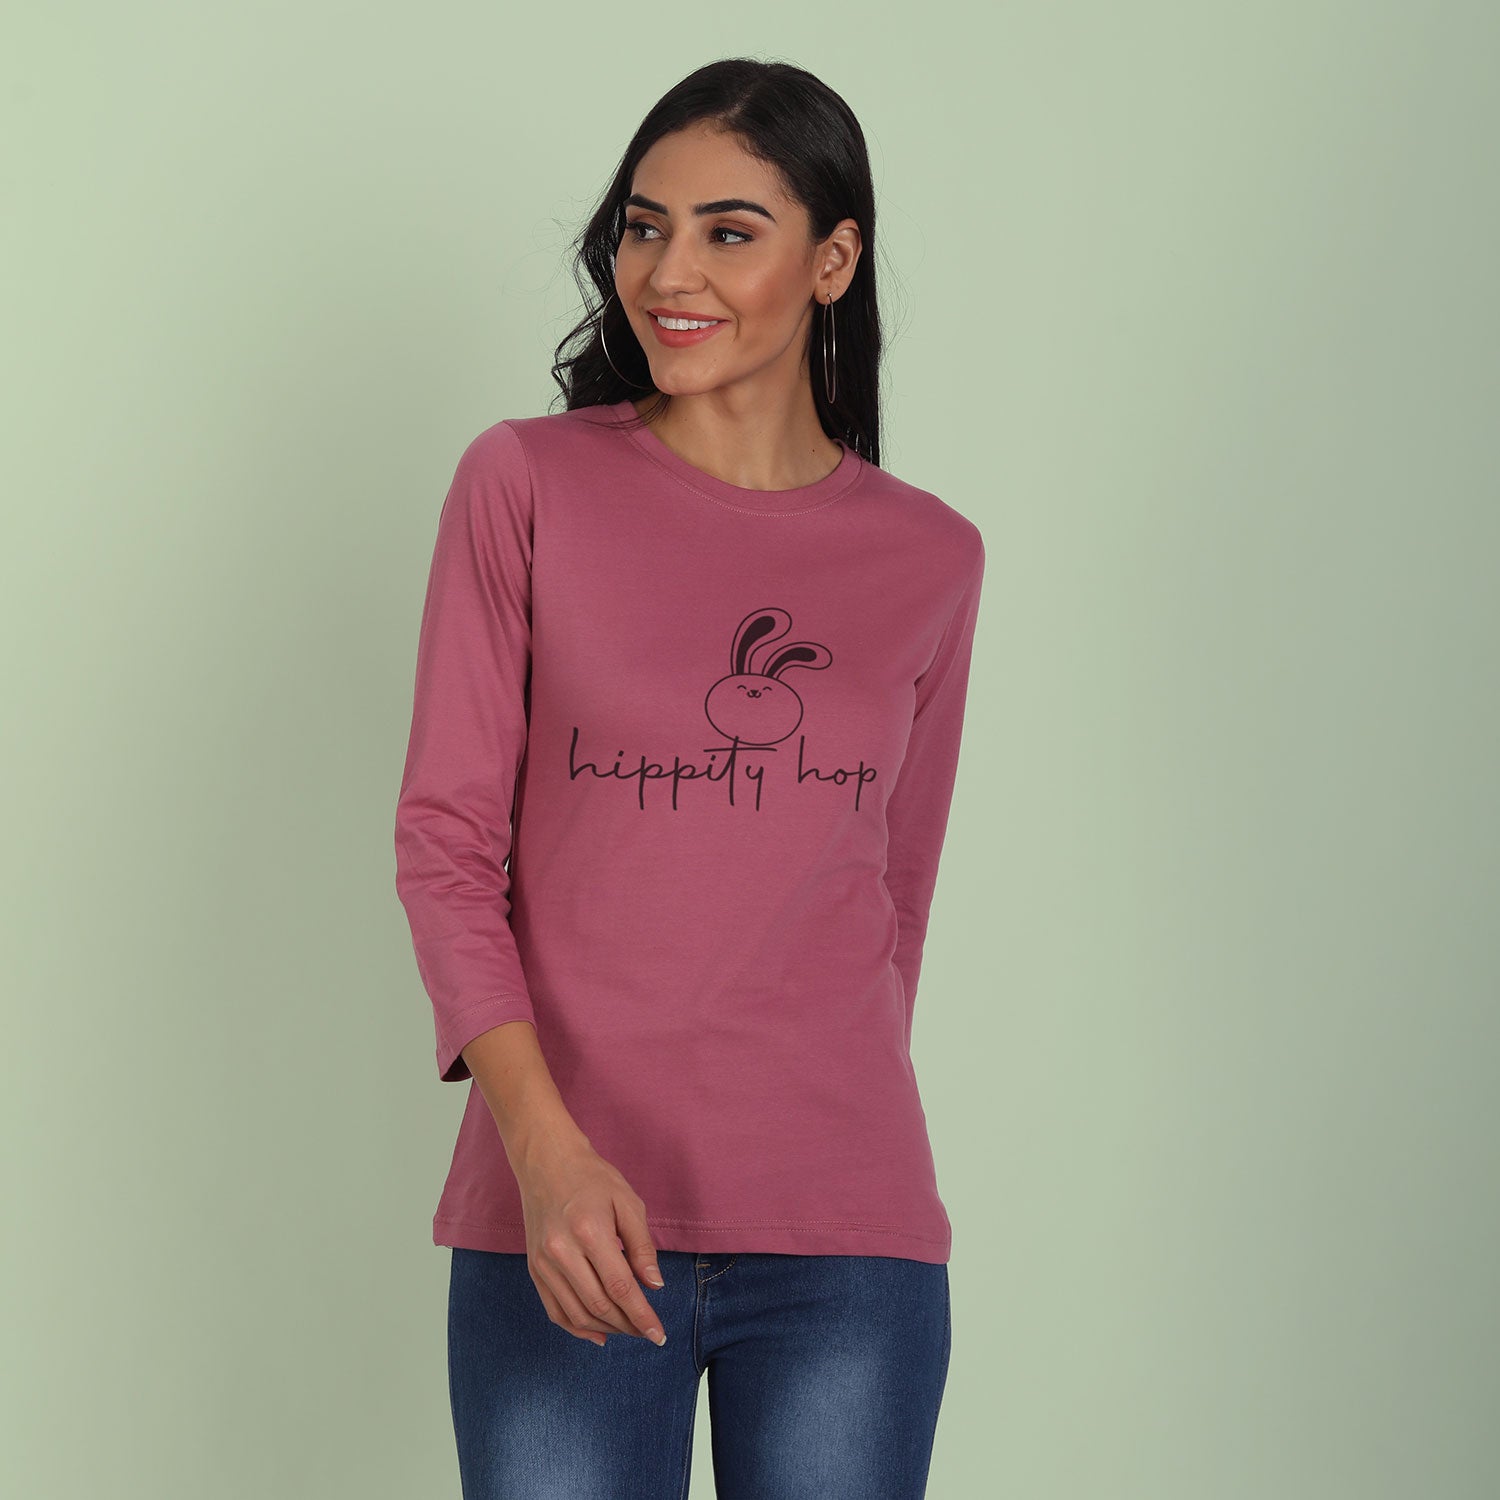 Hippity Hop Printed 3/4th Sleeve T-shirt For Girls